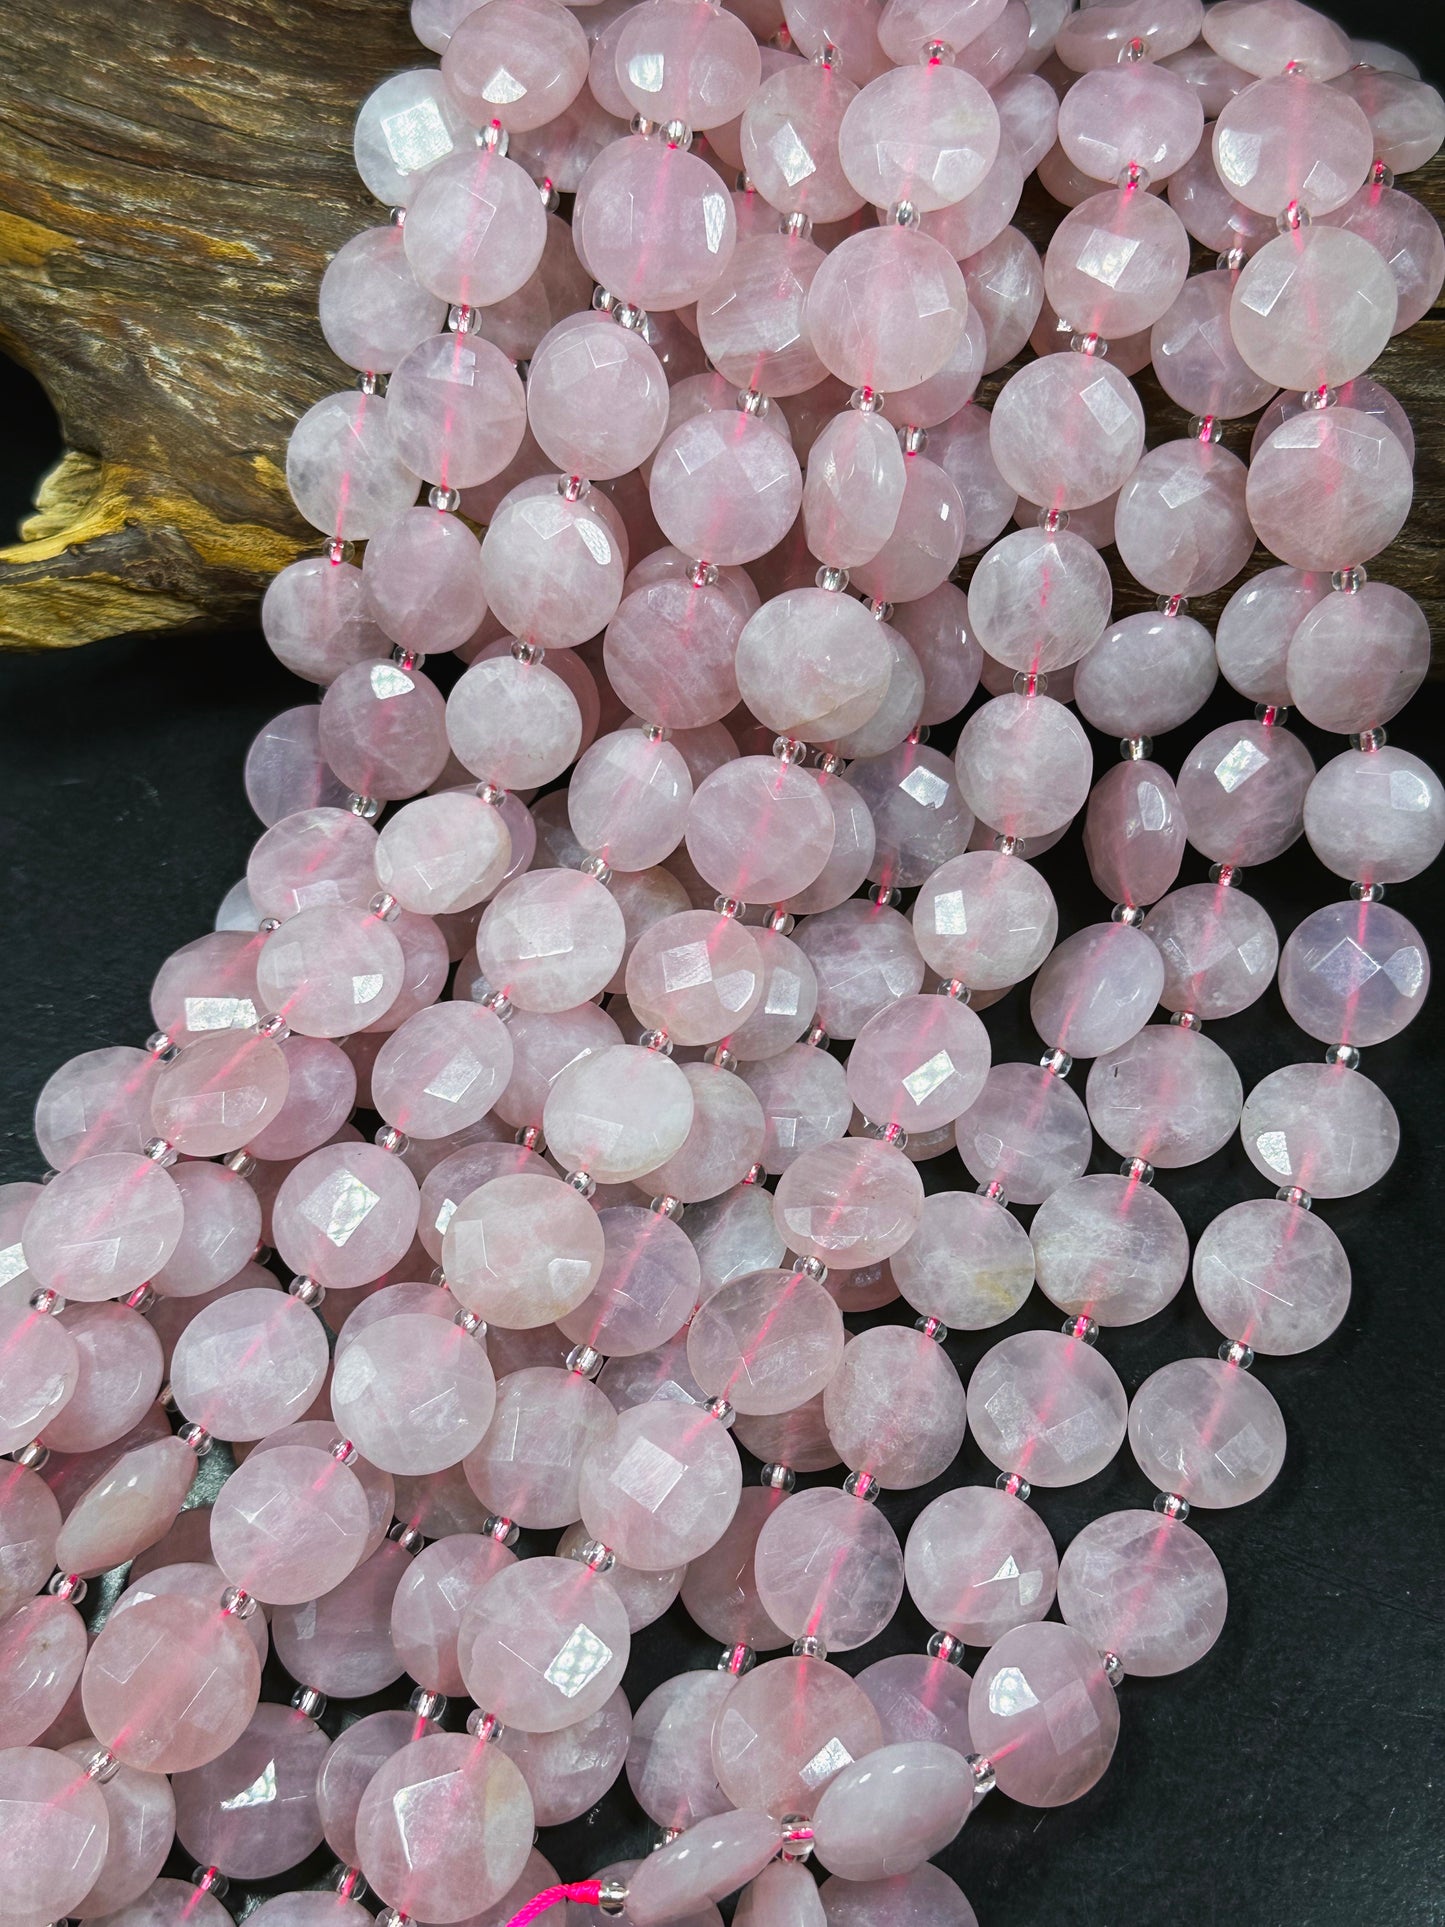 Natural Rose Quartz Gemstone Bead Faceted 18mm Coin Shape, Beautiful Natural Pink Color Rose Quartz Bead, Great Quality Full Strand 15.5"